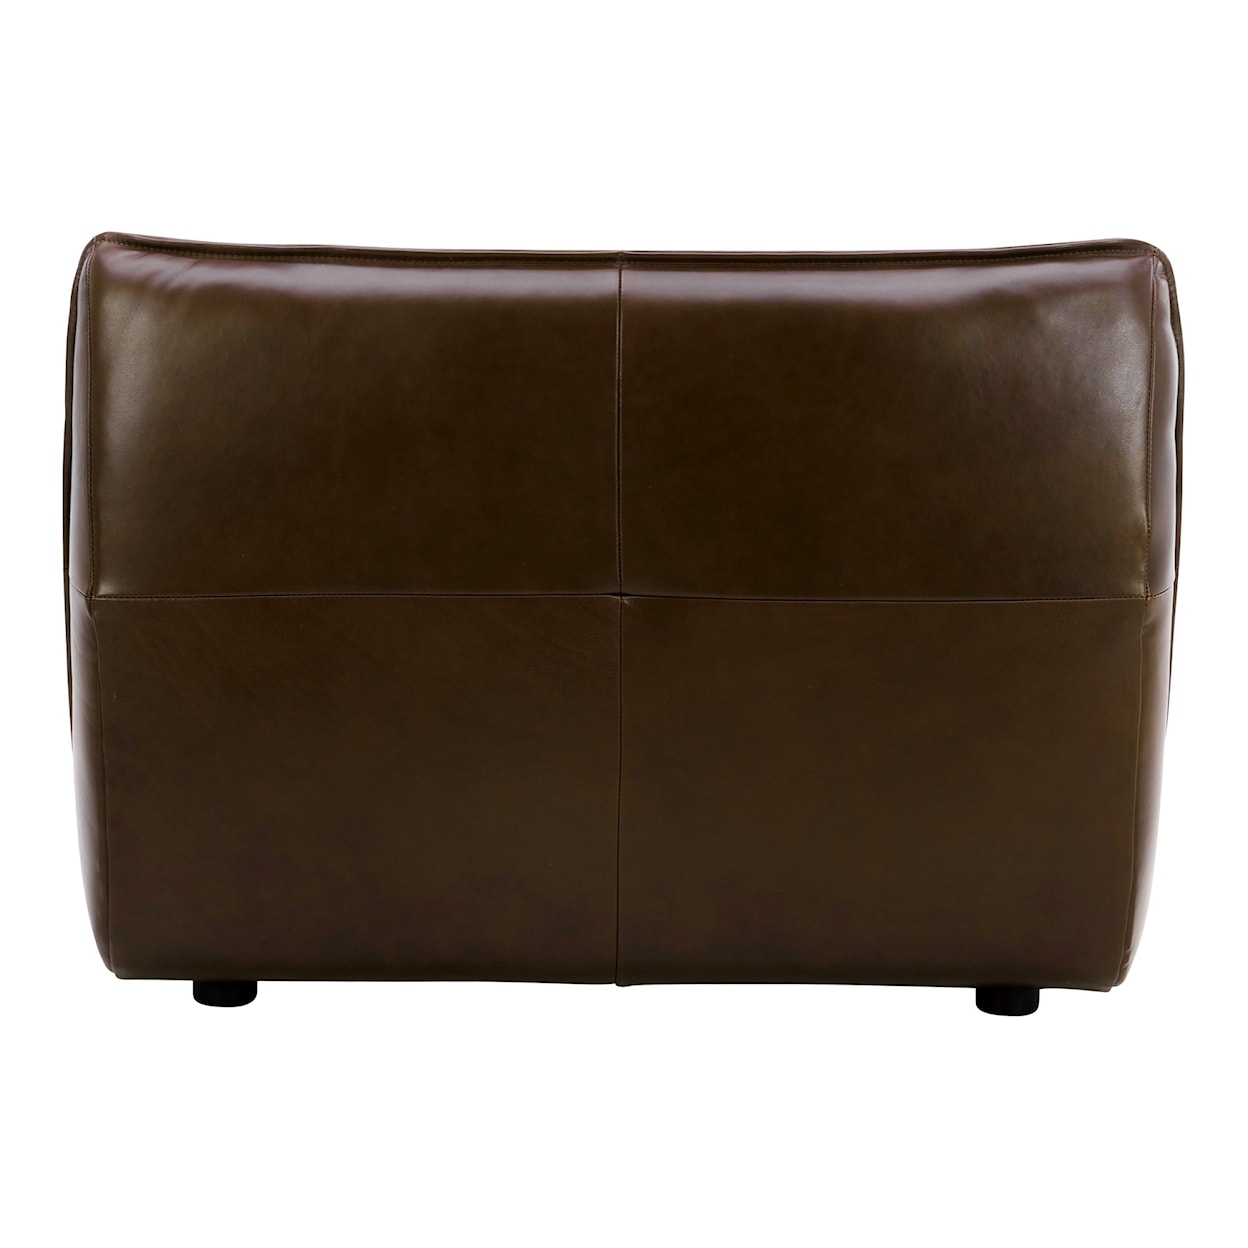 Moe's Home Collection Zeppelin Leather Slipper Chair